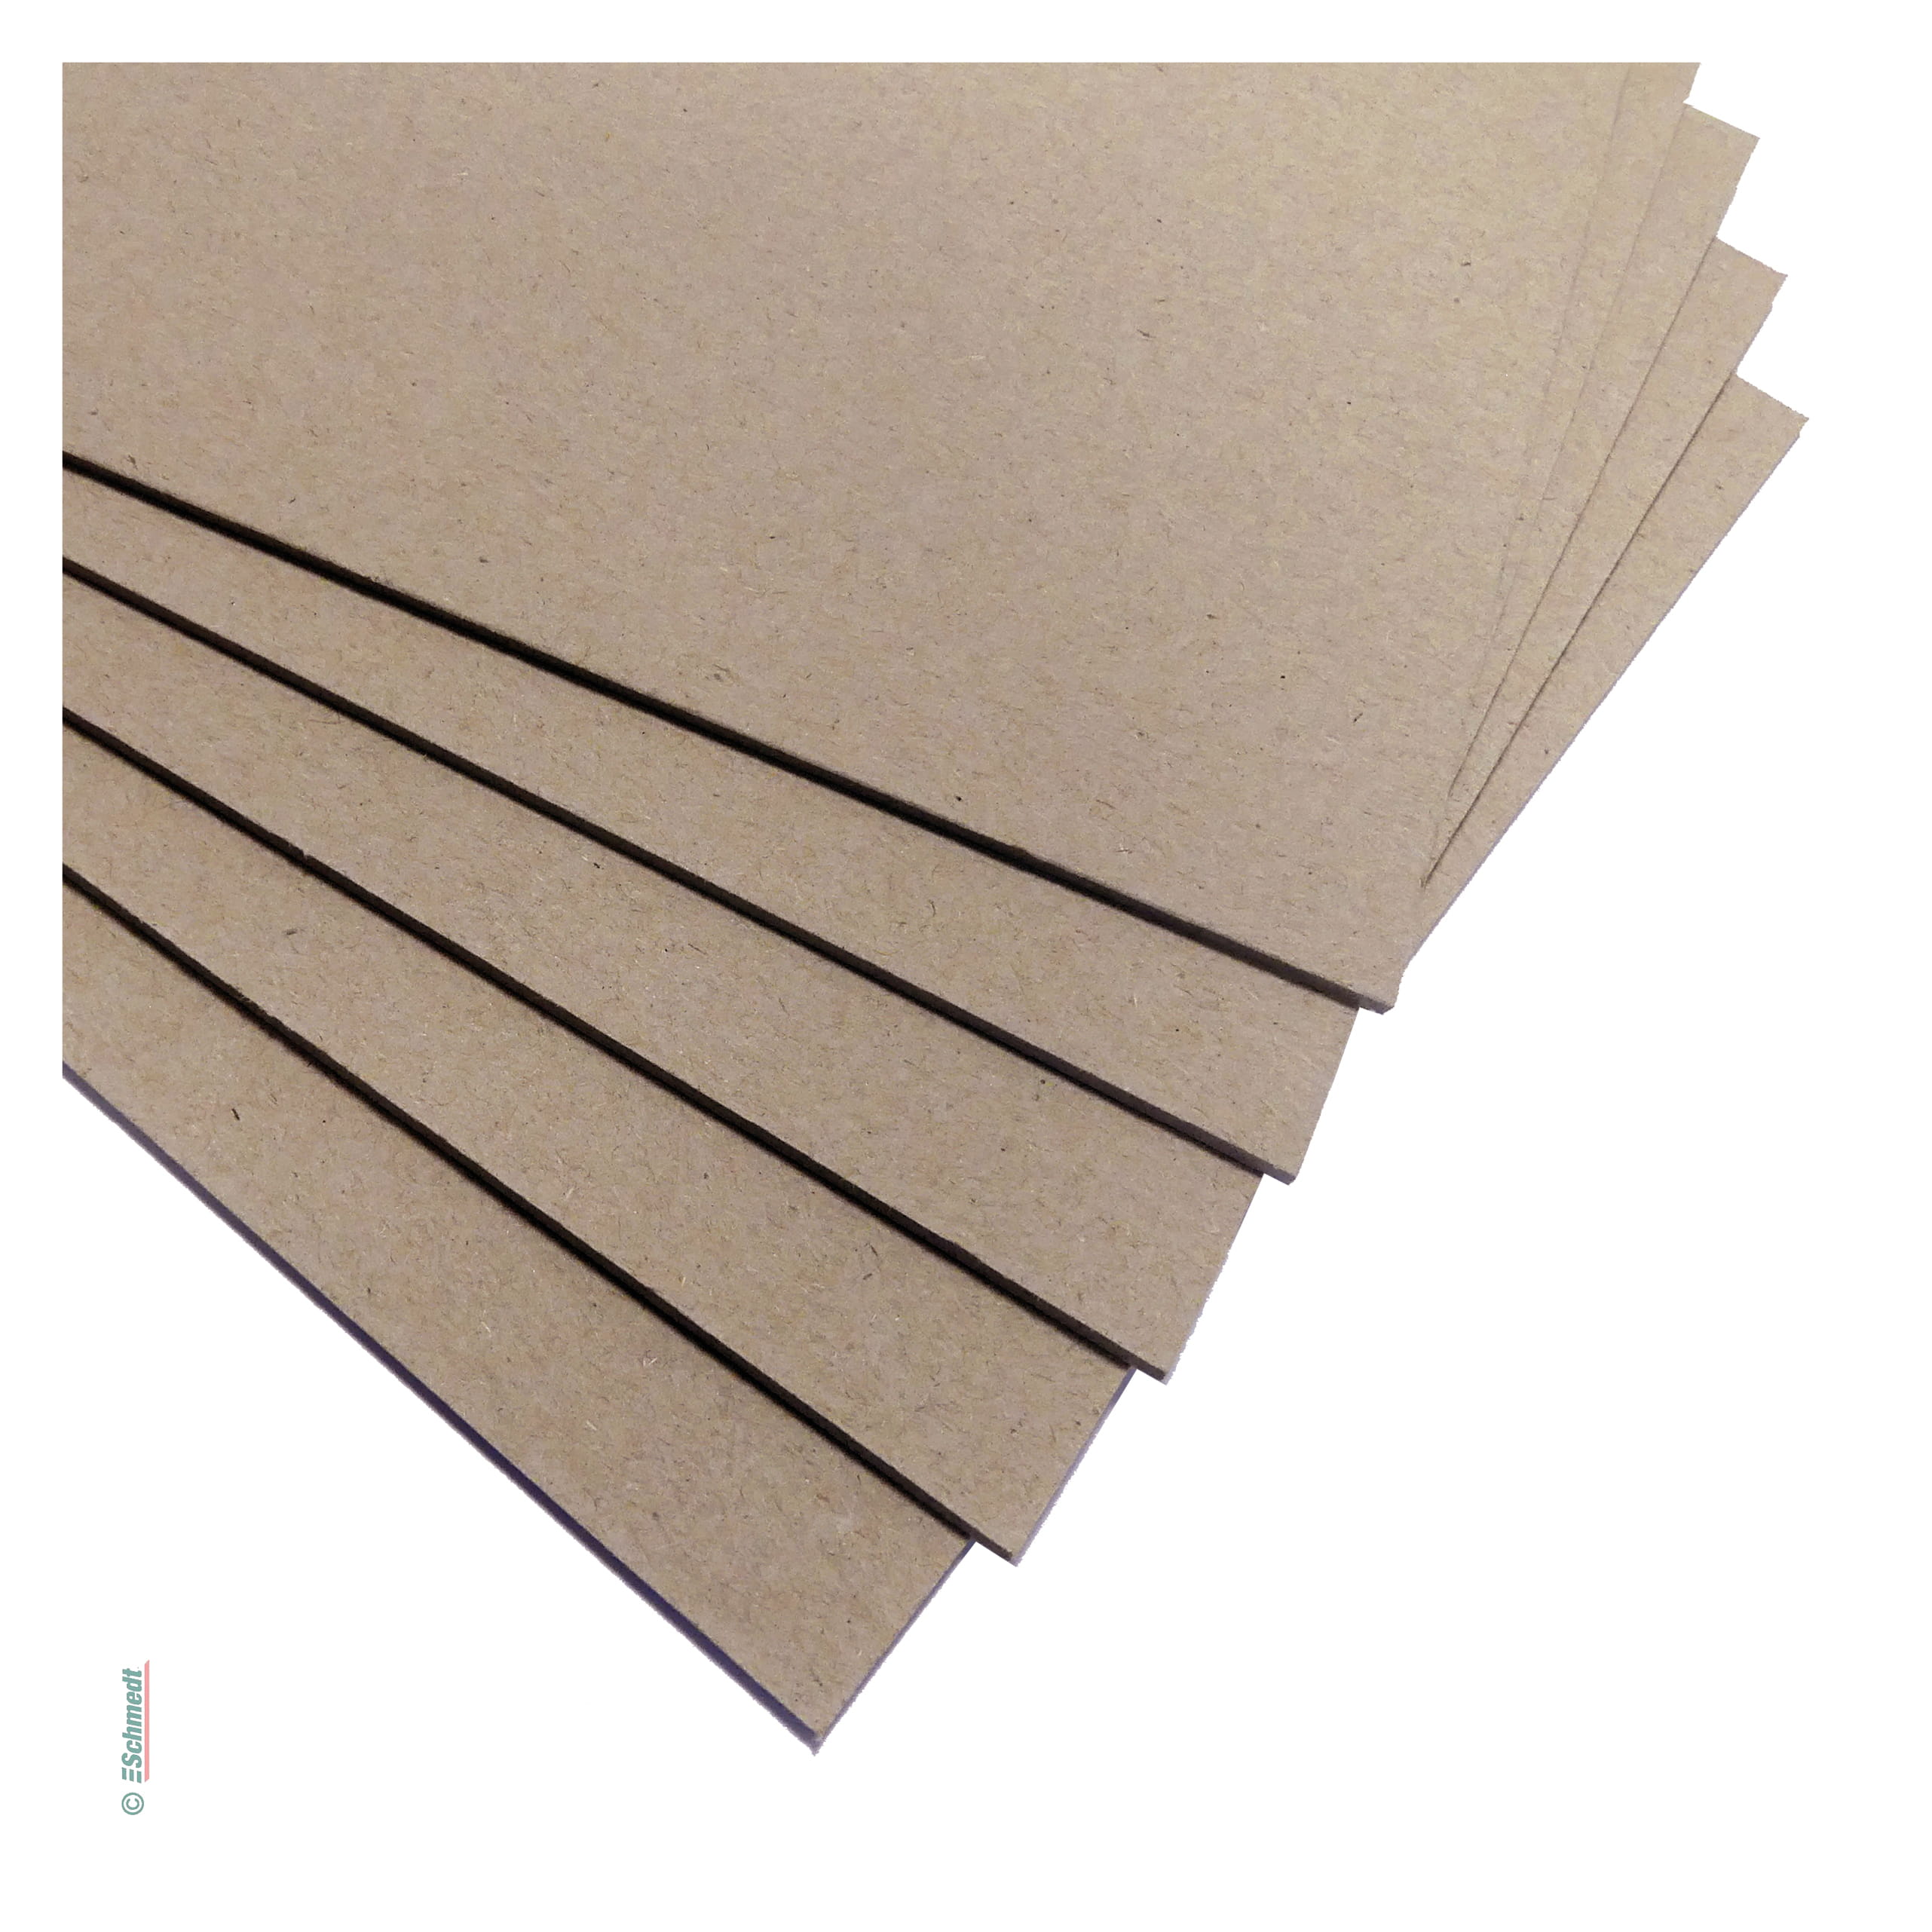 14 Oz Book Binding Grey Boards, Size: 20x30 Inch at Rs 32/kg in Washim